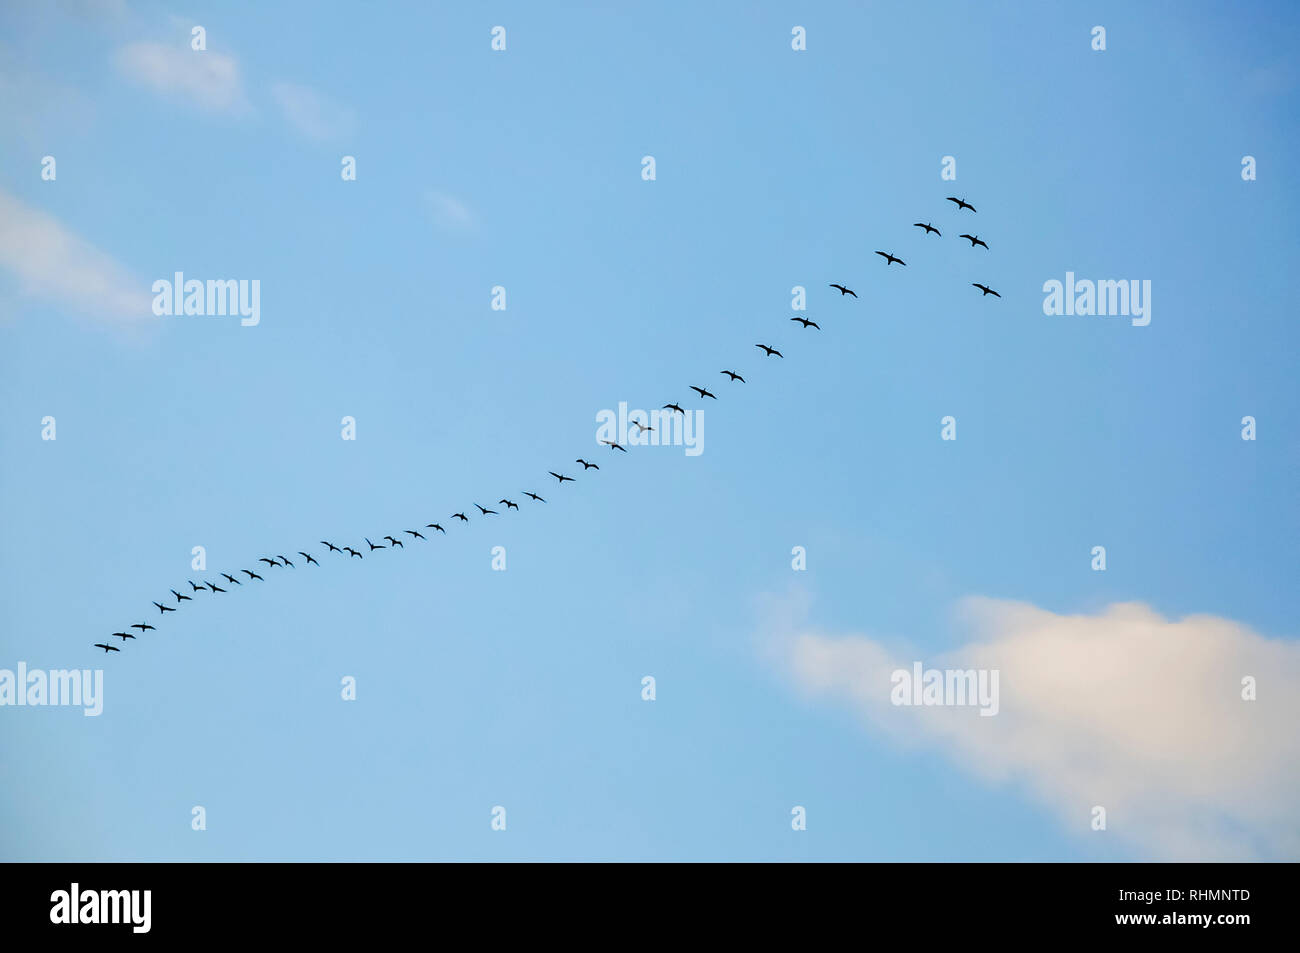 Bird migration. A flock of birds fly in an arrow formation on a blue sky background. Photographed in the Galilee,  Israel in January Stock Photo